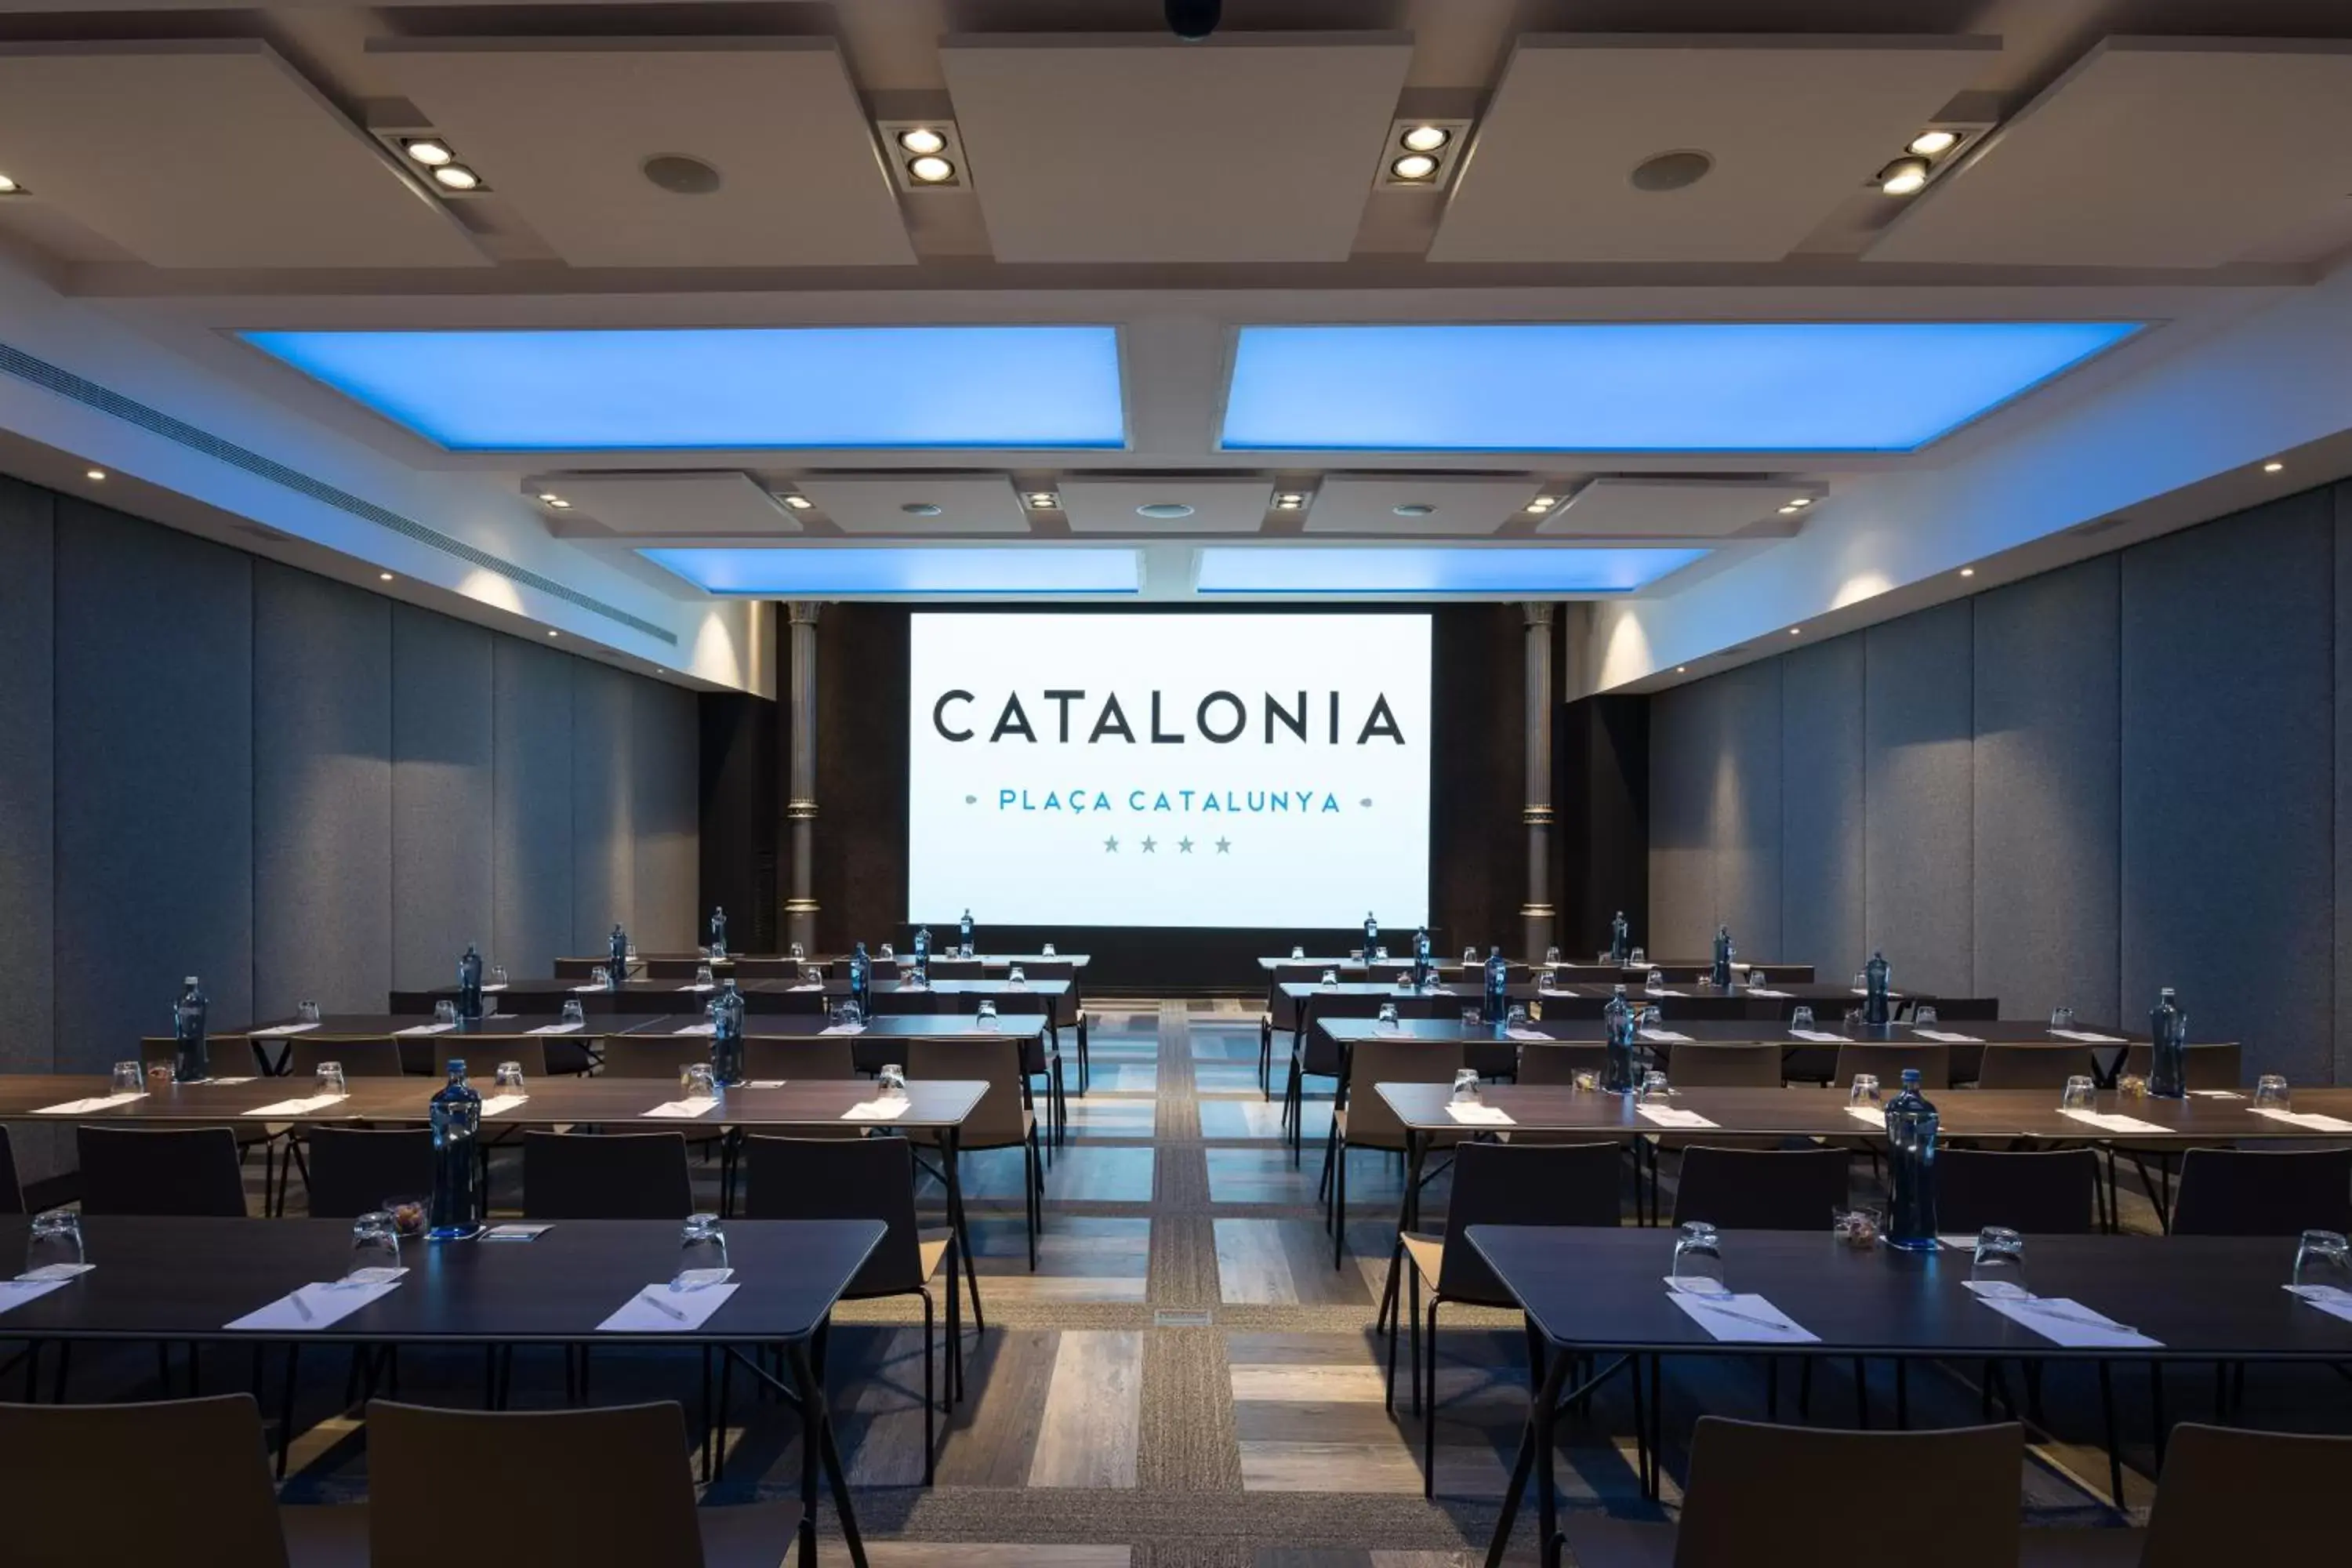 Meeting/conference room in Catalonia Plaza Catalunya